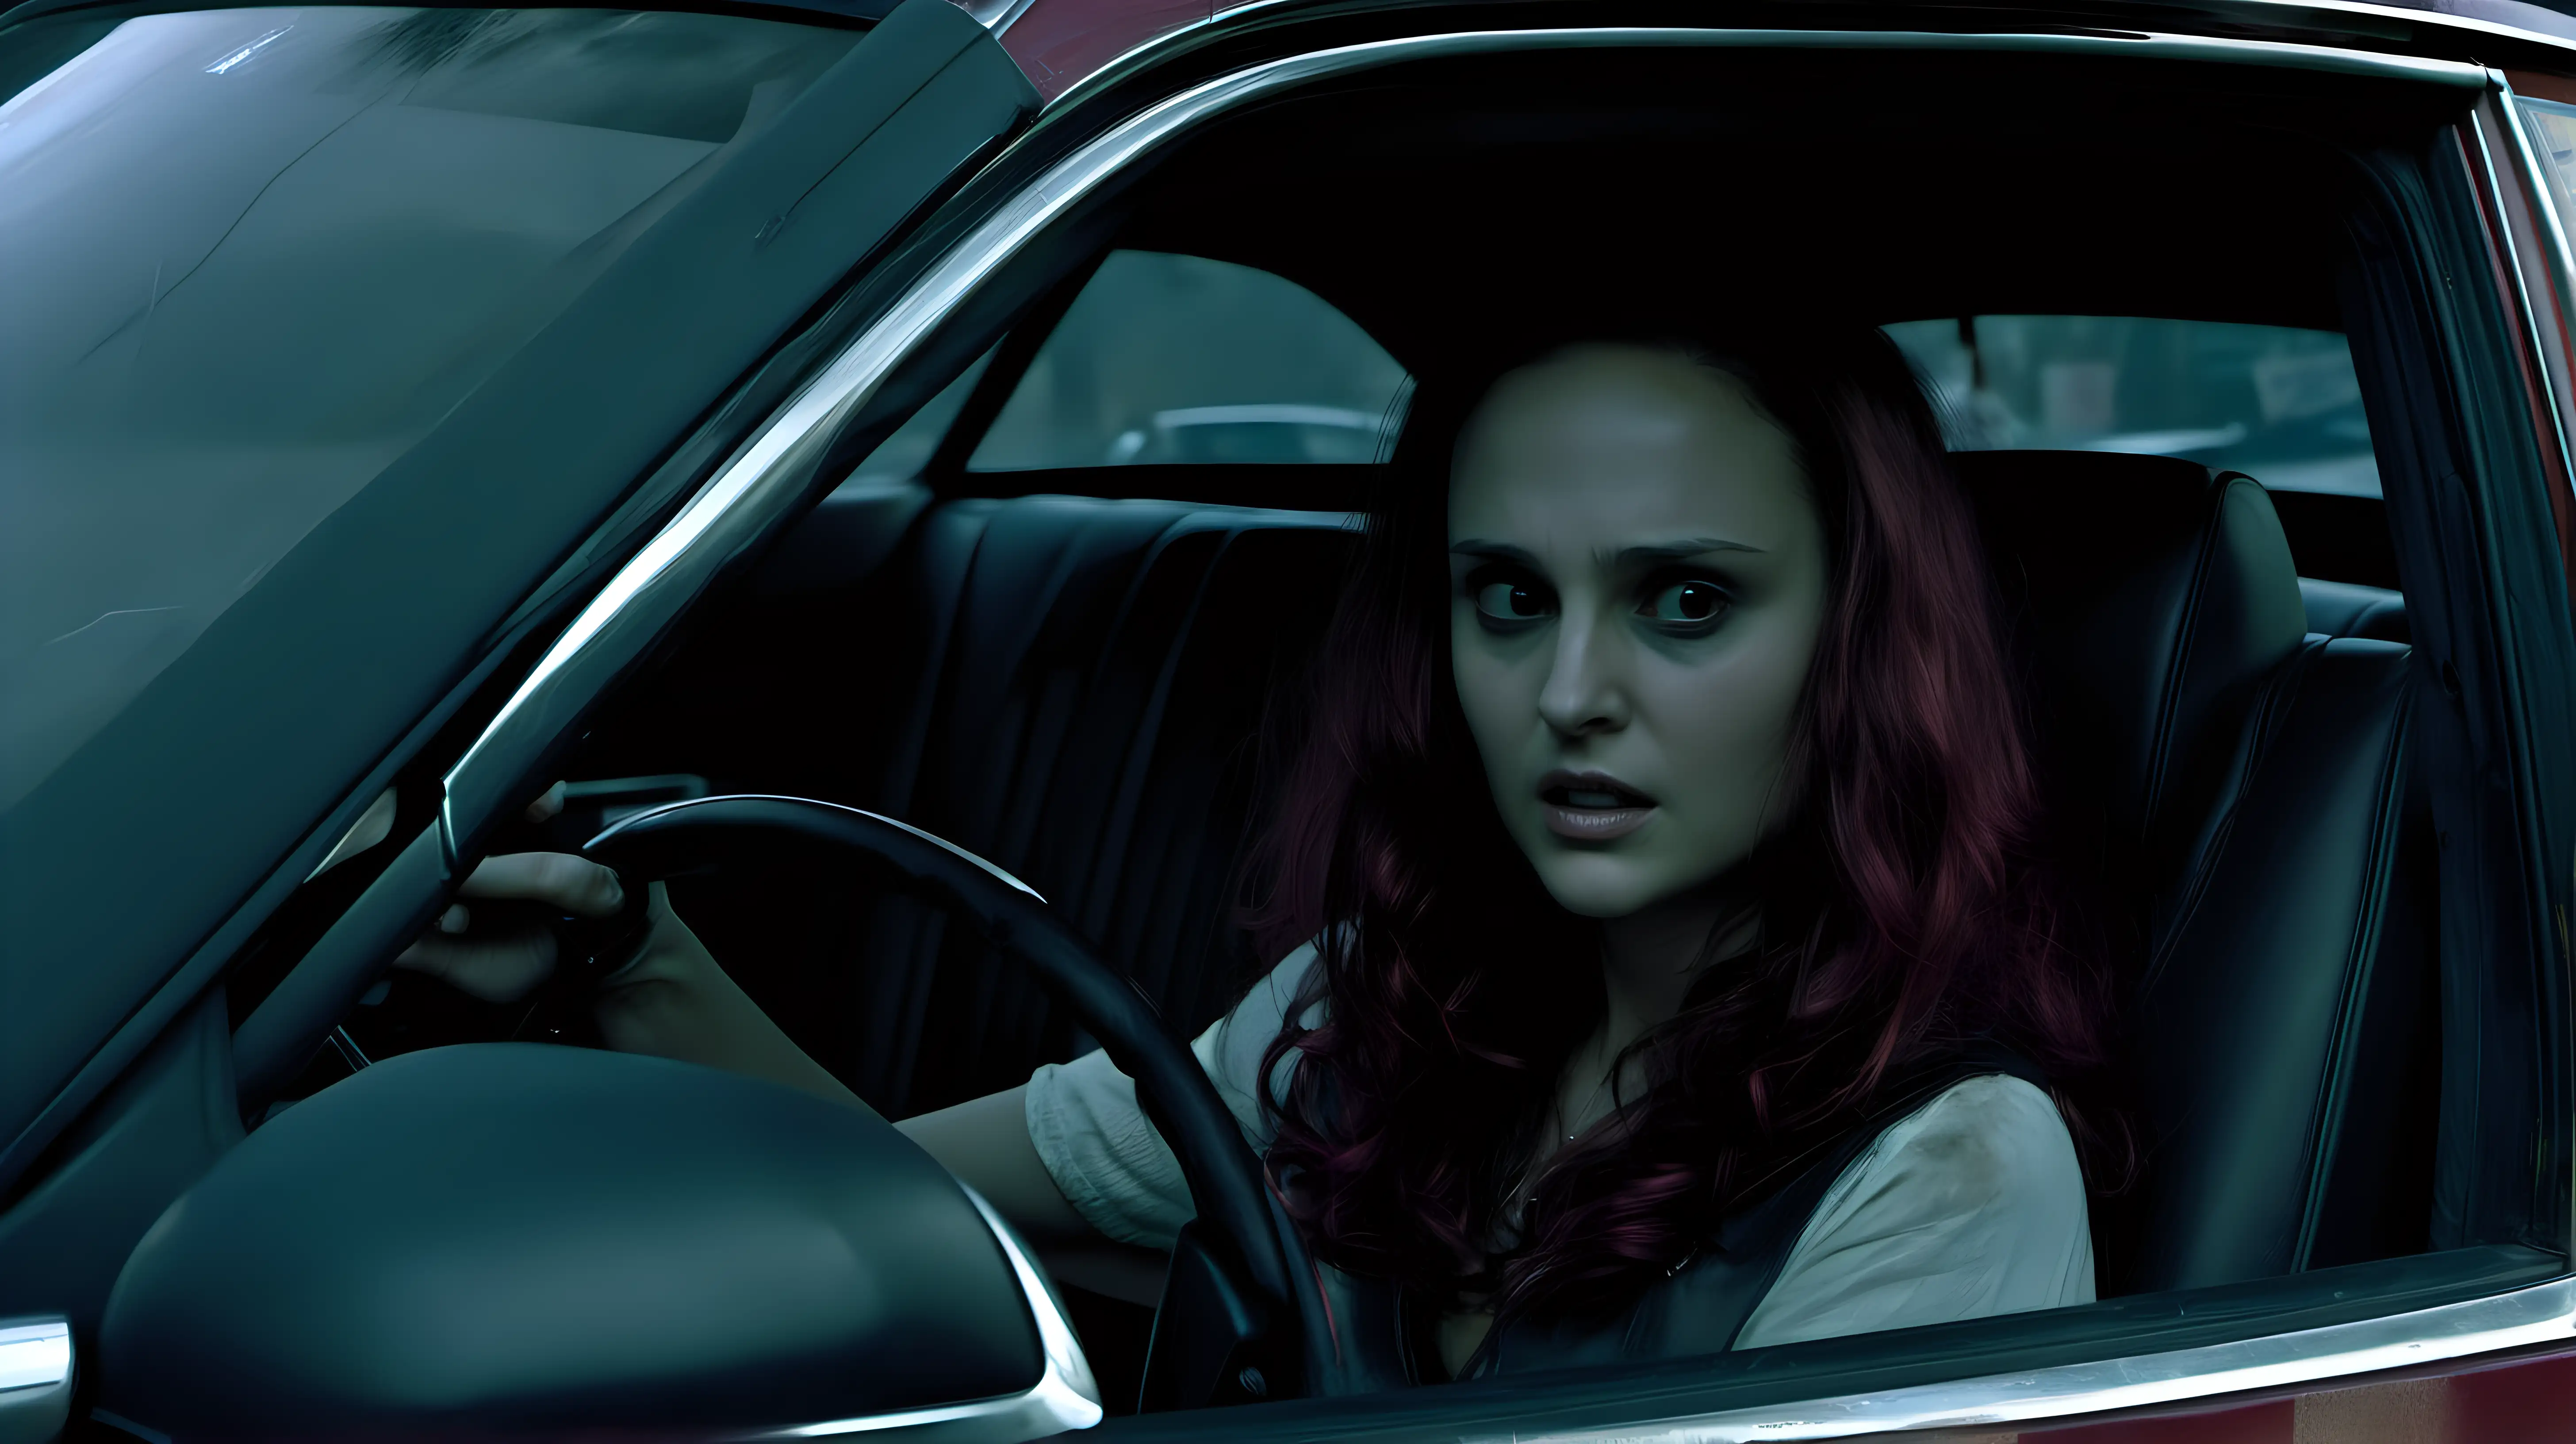 Subject: A young woman, embodying fear

Setting: Inside a car, situated on a dimly lit street

Background: The scene is primarily inside the car, with a clear view of the driver's seat and the steering wheel

Style/Coloring: The atmosphere is charged with tension, featuring shadowy and subdued lighting to enhance the suspense

Action: The woman is seen gazing out the window in fear

Items: The car's interior, especially the visible steering wheel, contributes to the feeling of confinement and anxiety

Costume/Appearance: The woman, resembling a 40-year-old Natalie Portman, has striking dark red hair, obviously dyed, which adds a unique characteristic to her appearance

Accessories: An approaching biker, seen through the car window, serves as an accessory, adding to the suspense and sense of impending interaction